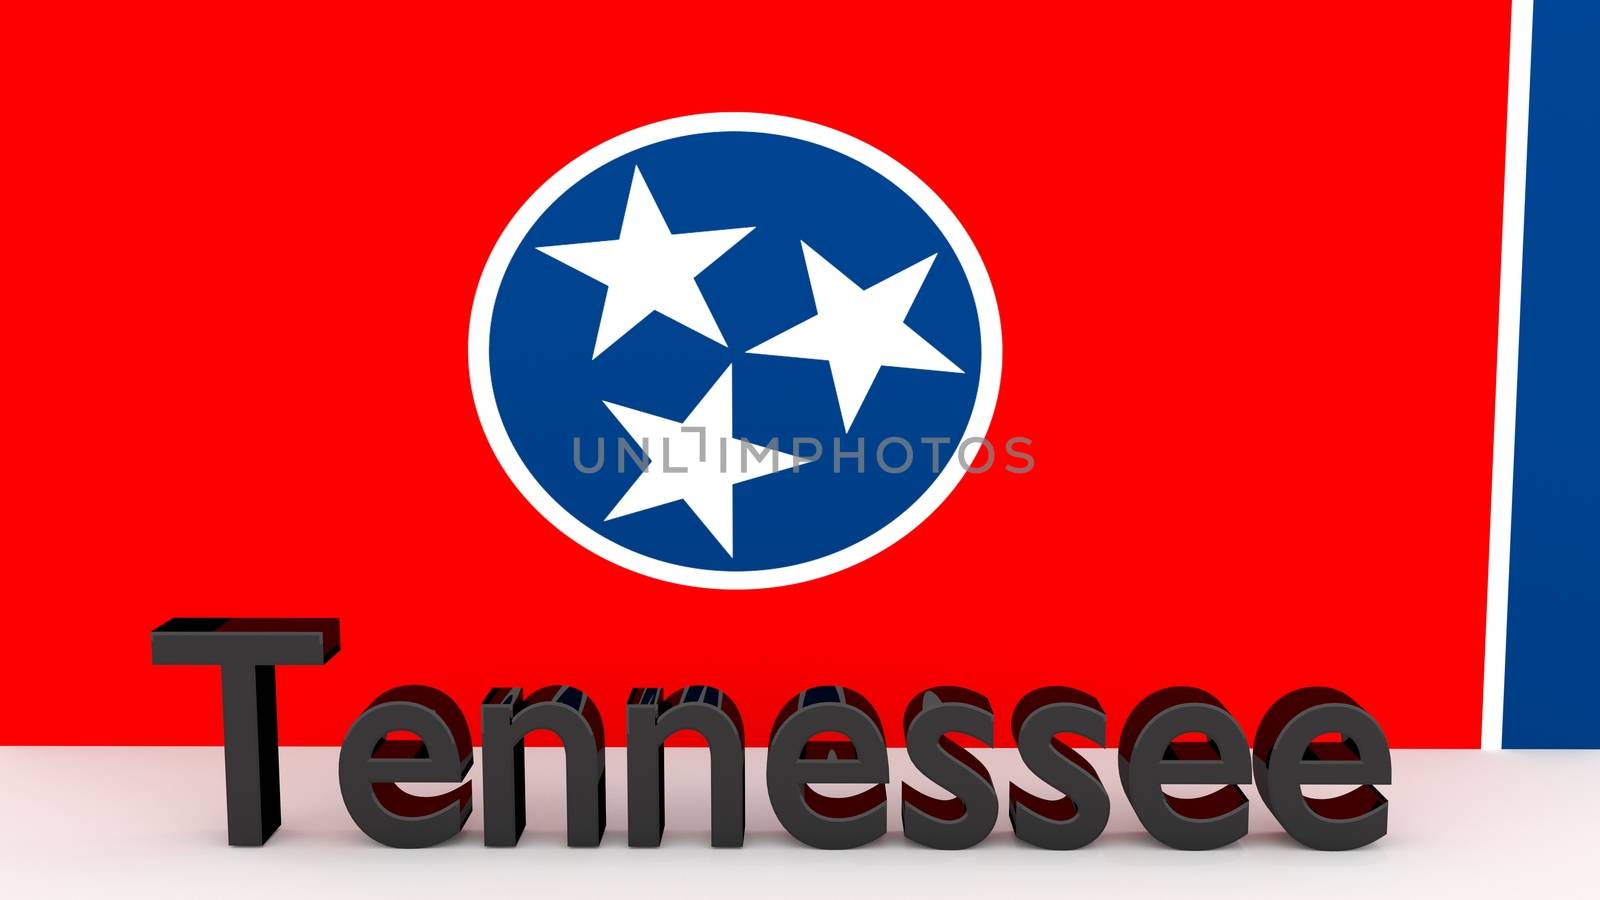 US state Tennessee, metal name in front of flag by MarkDw